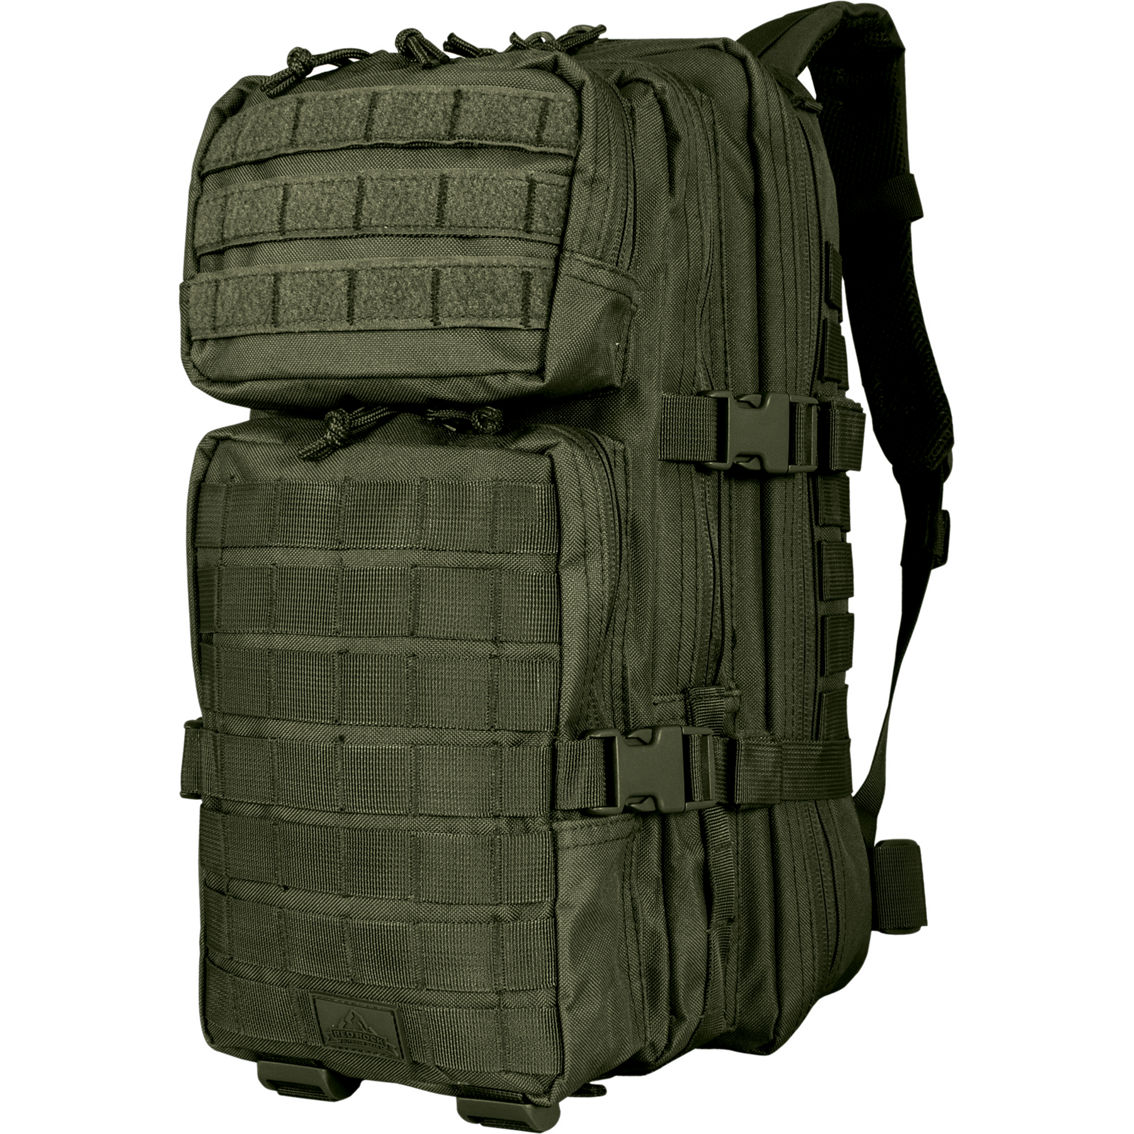 Red Rock Outdoor Gear Assault Pack - Image 3 of 7